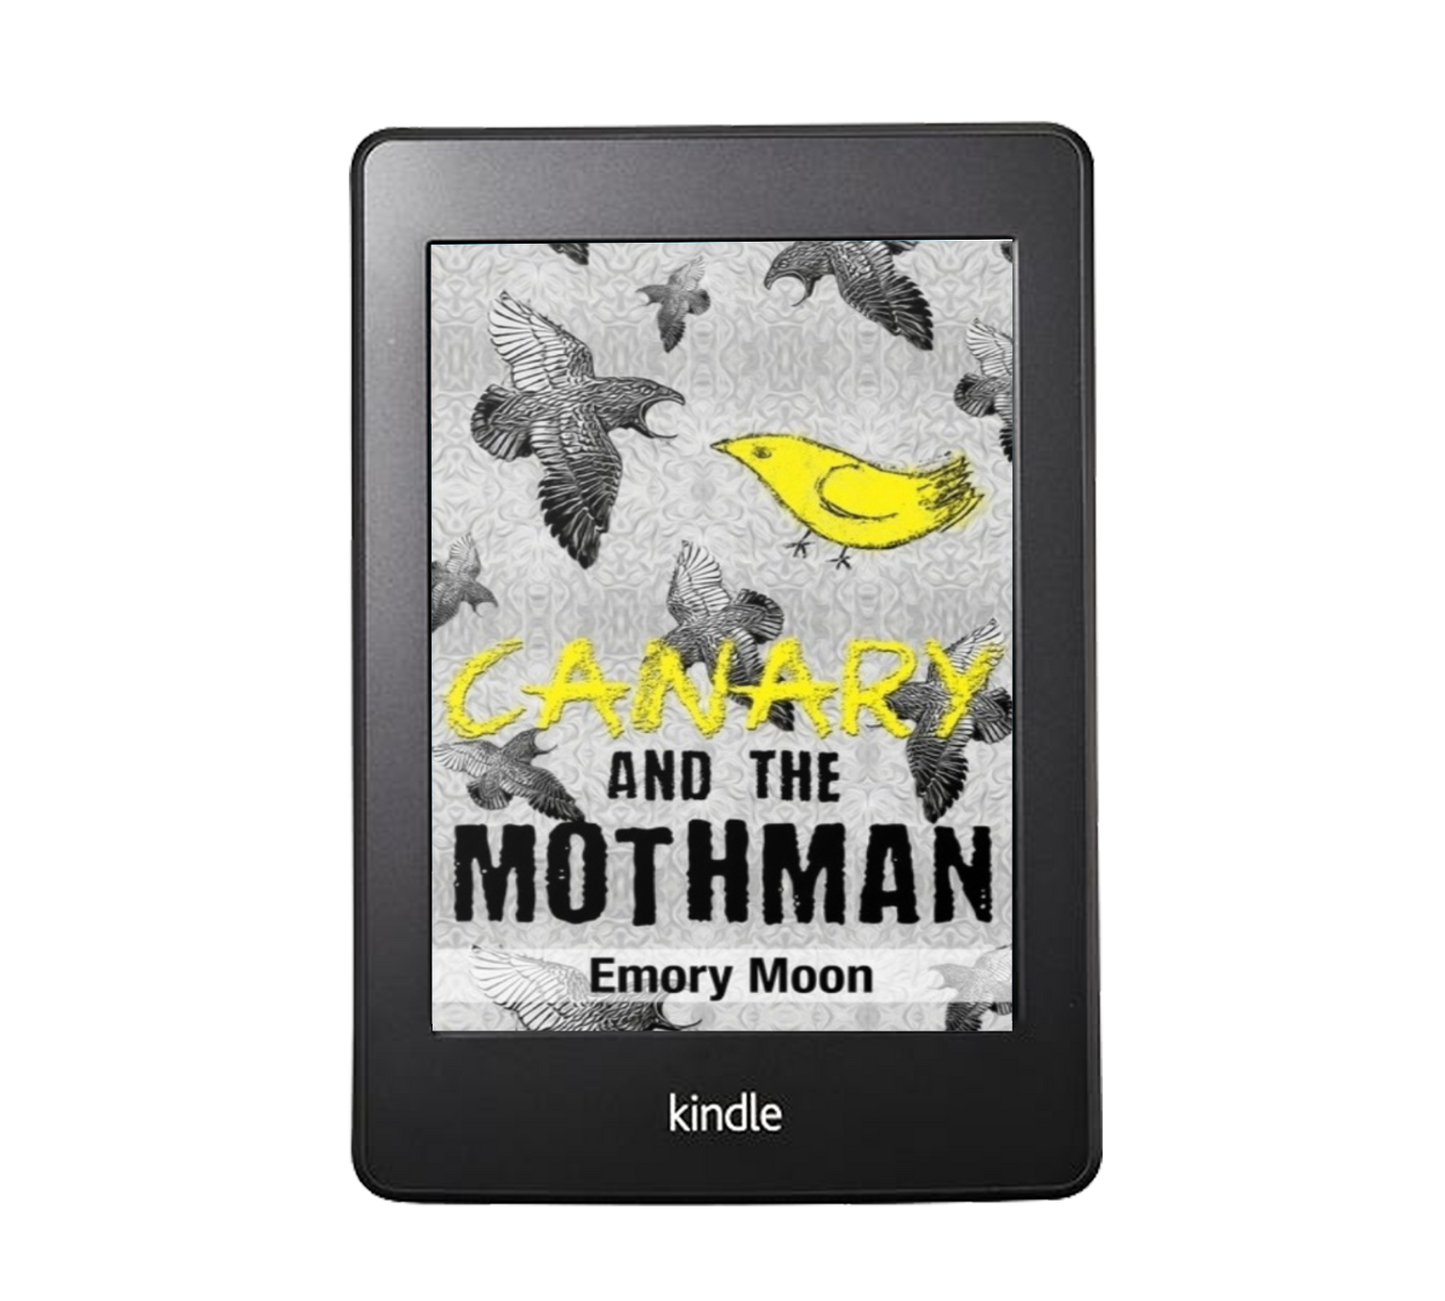 Your FREE copy of Canary and the Mothman - (ebook instant download) (Canary Trilogy Part-1) FREE after BUNDLE498 discount